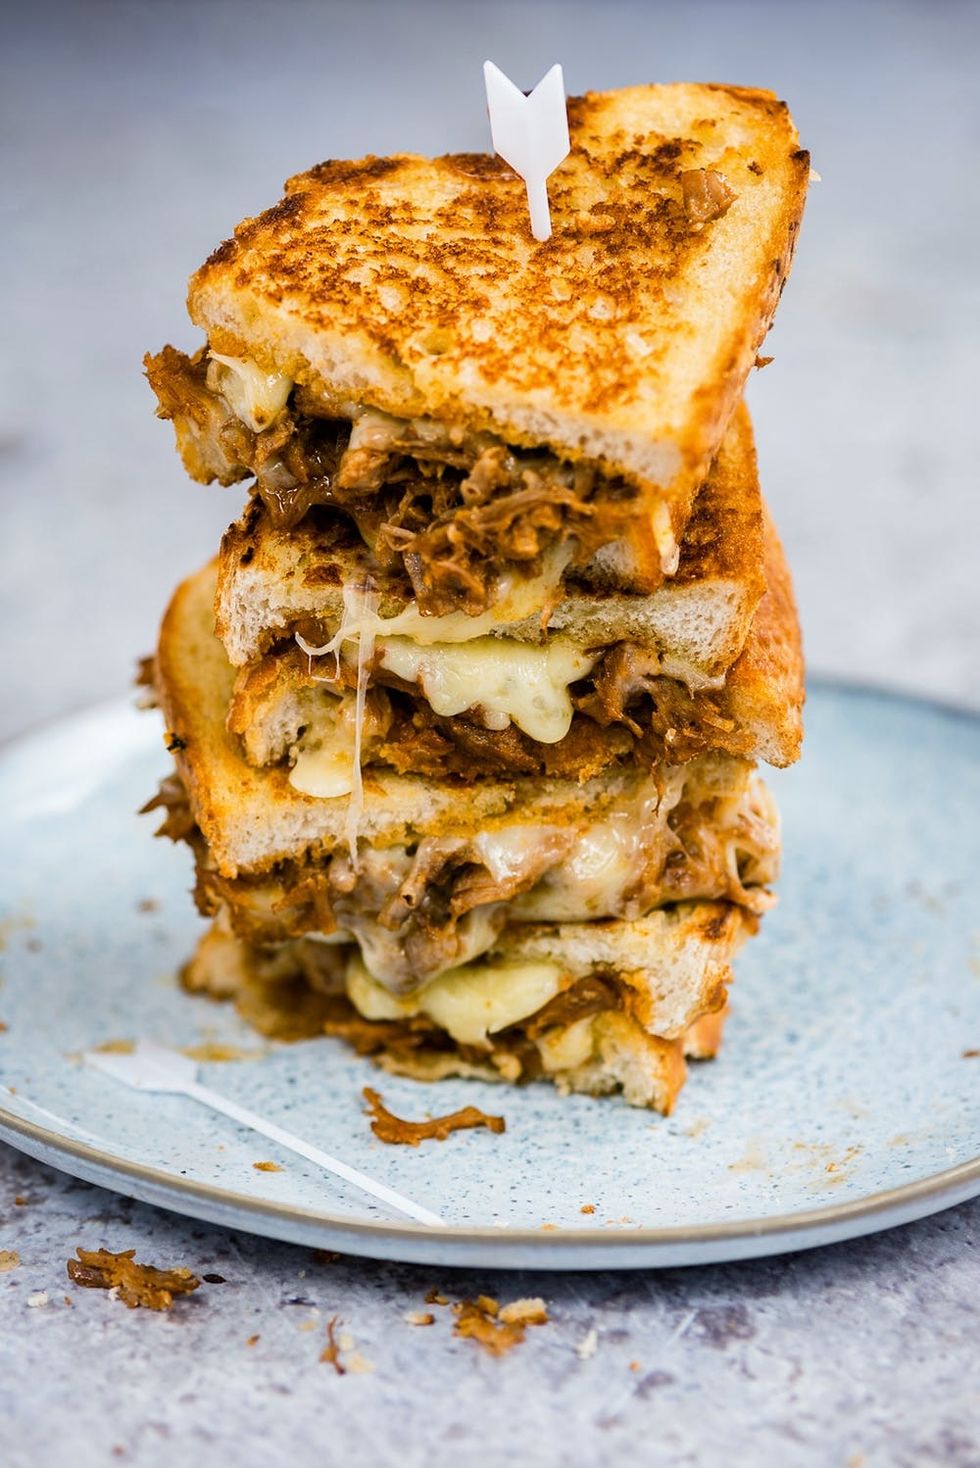 This pulled pork grilled cheese sandwich is the ultimate father's day recipe